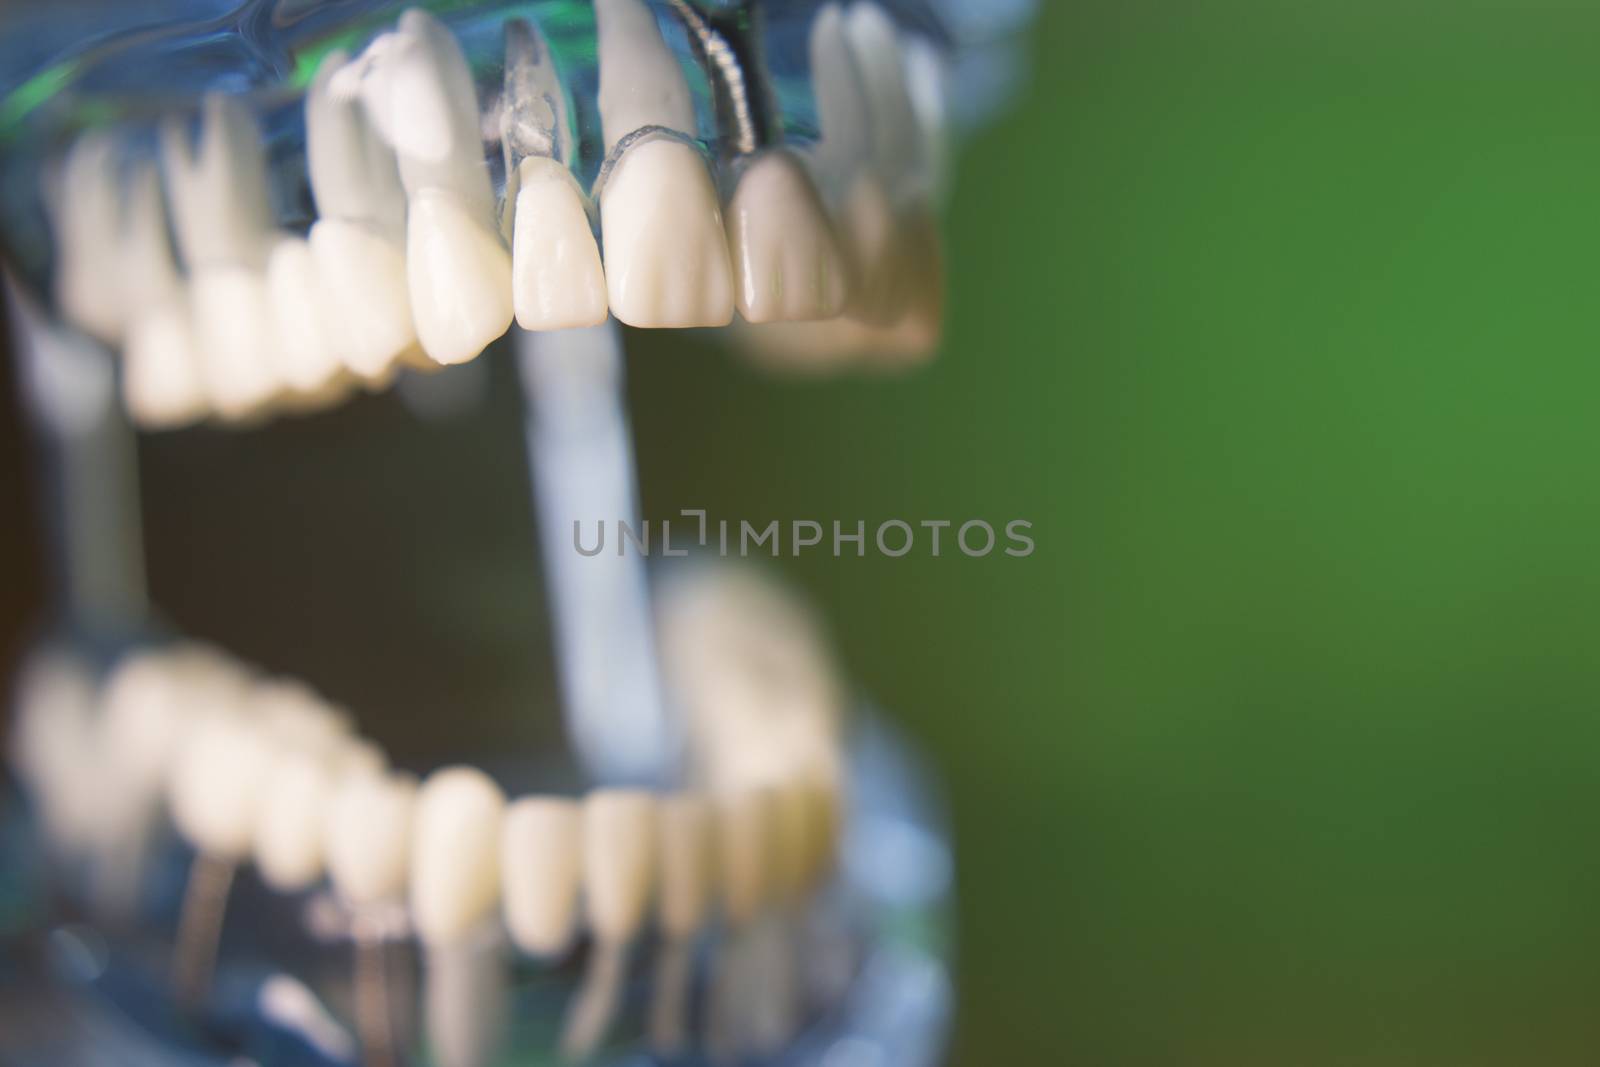 Denture for dentistry students by GemaIbarra